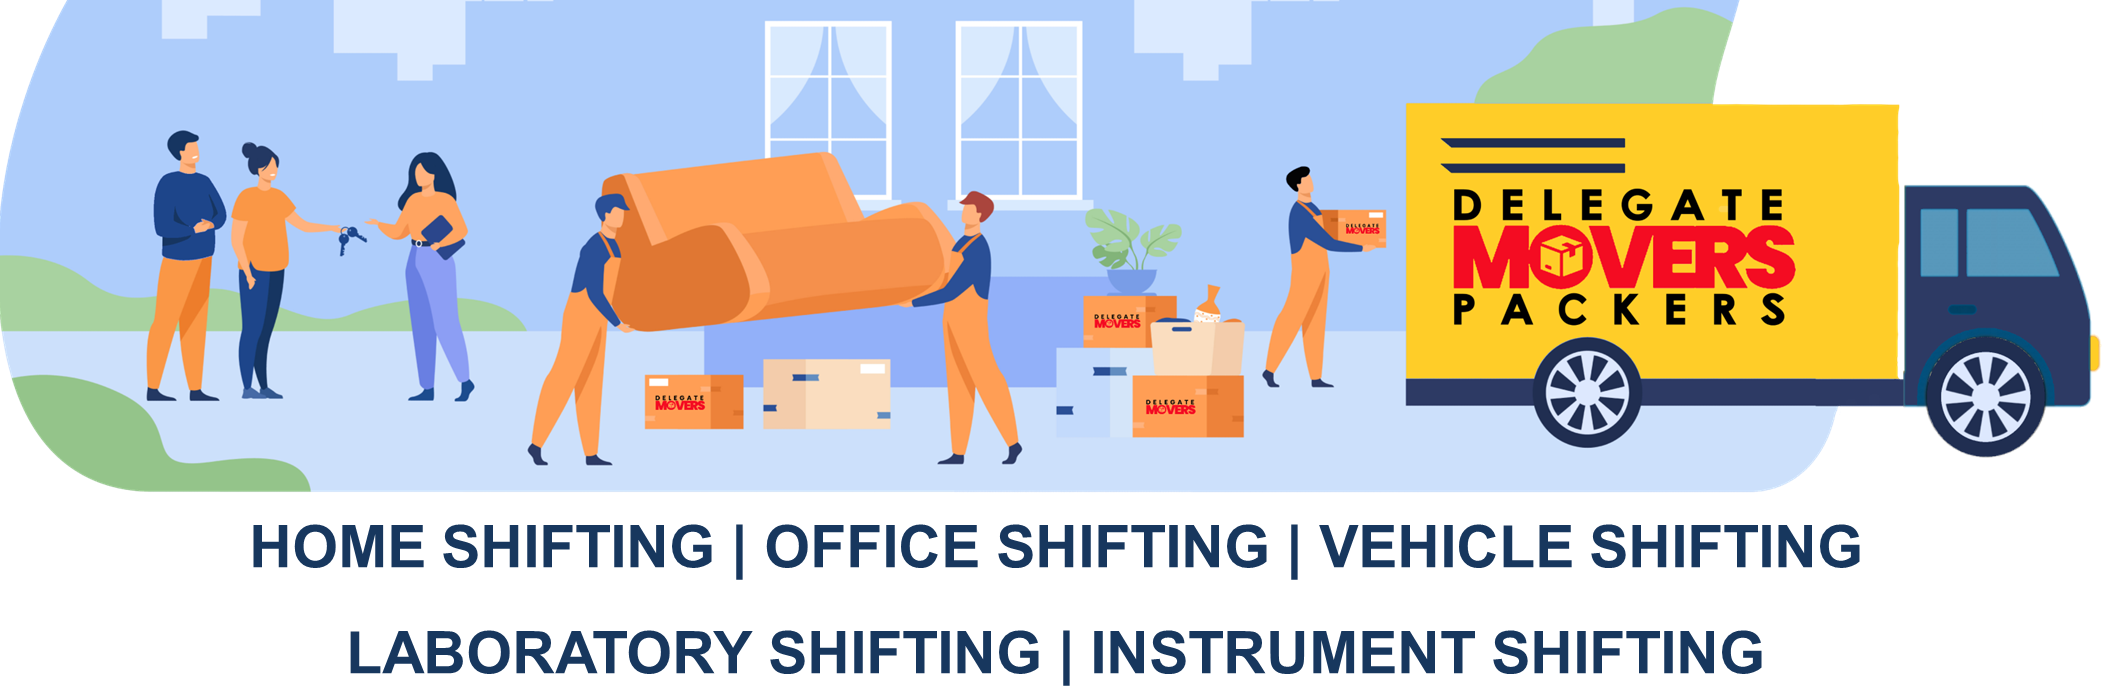 Shifting Services by Delegate Movers and Packers